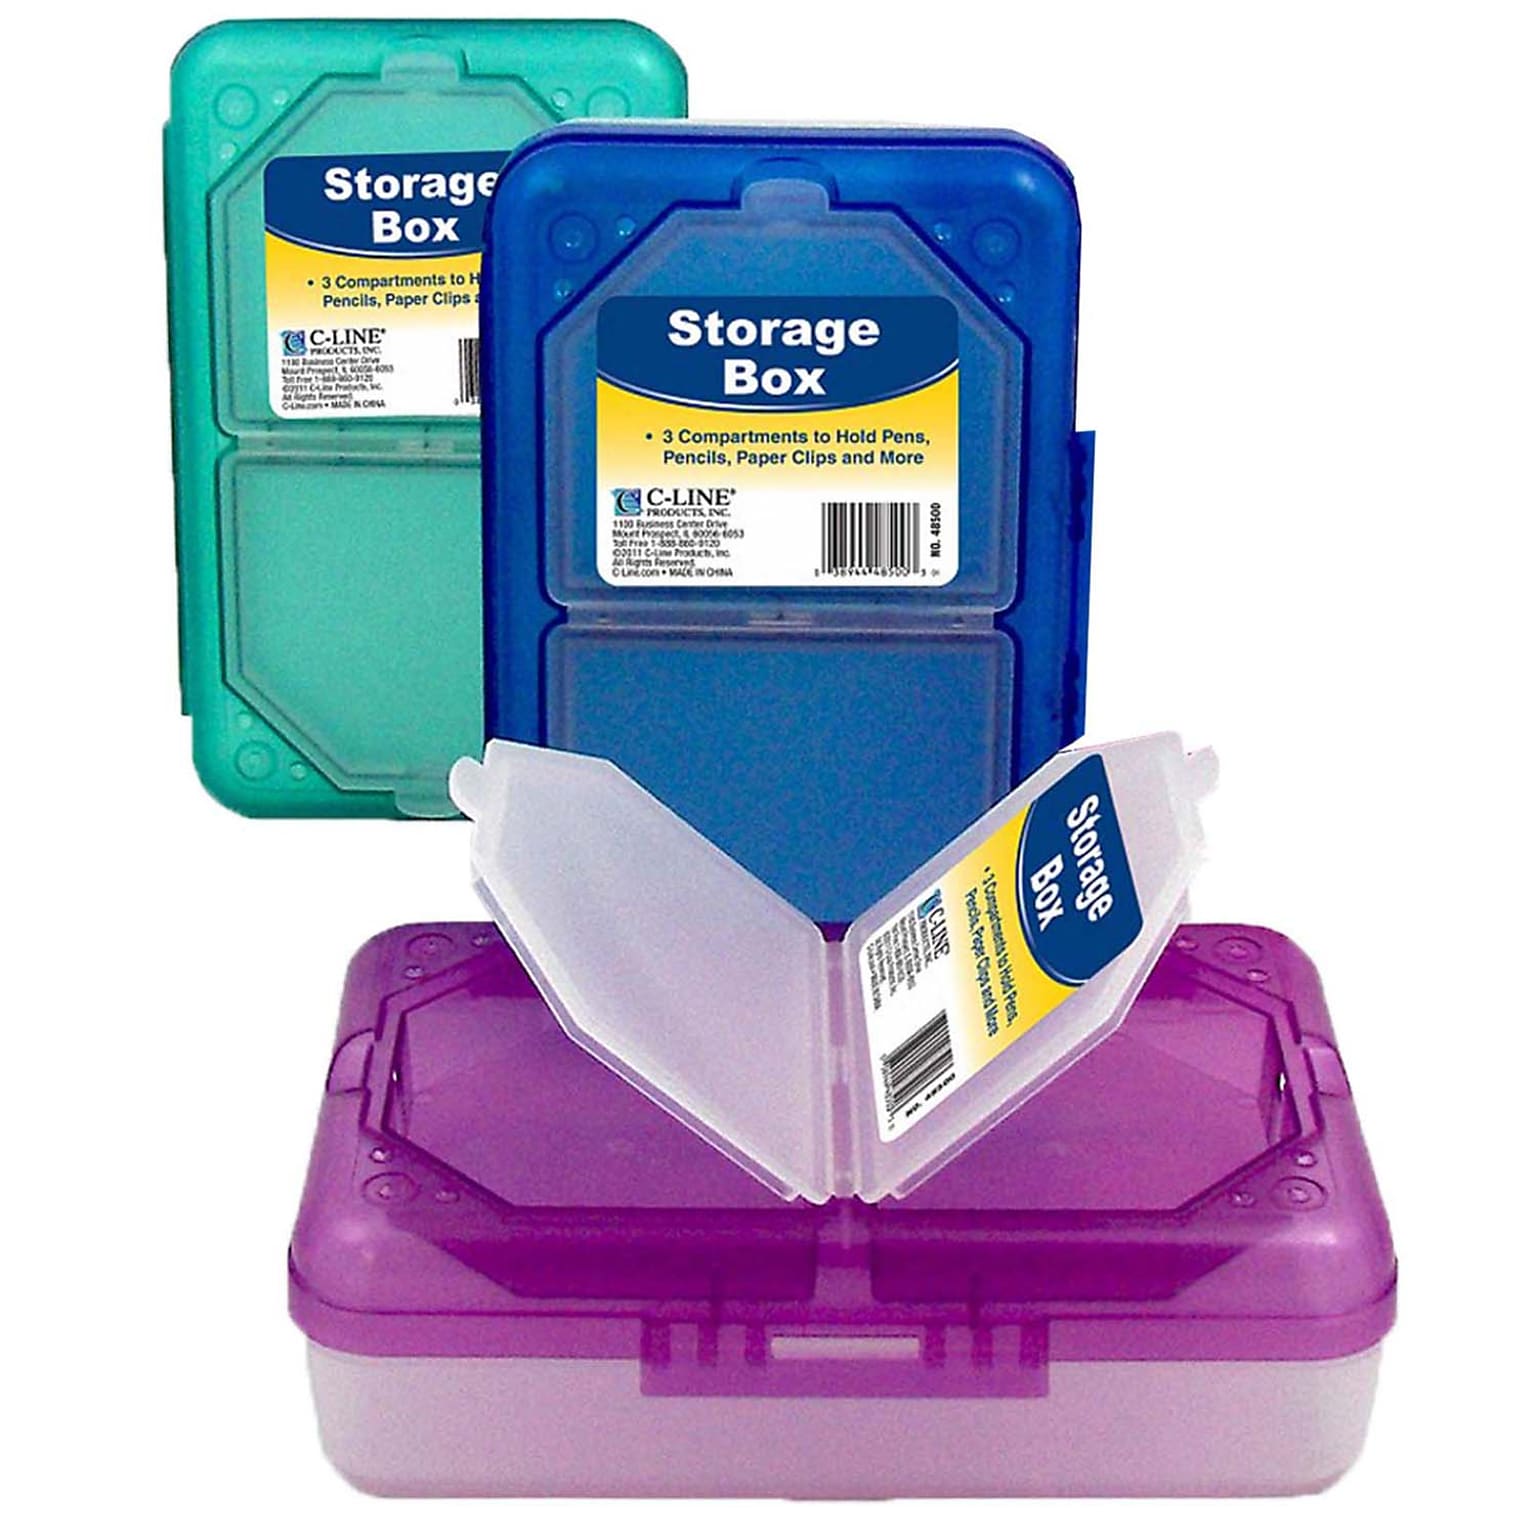 C-Line Plastic 3 Compartment Storage Box, 7.90 × 4.90 × 2.50, Assorted Colors (no color choice), Pack of 3 (CLI48500-3)